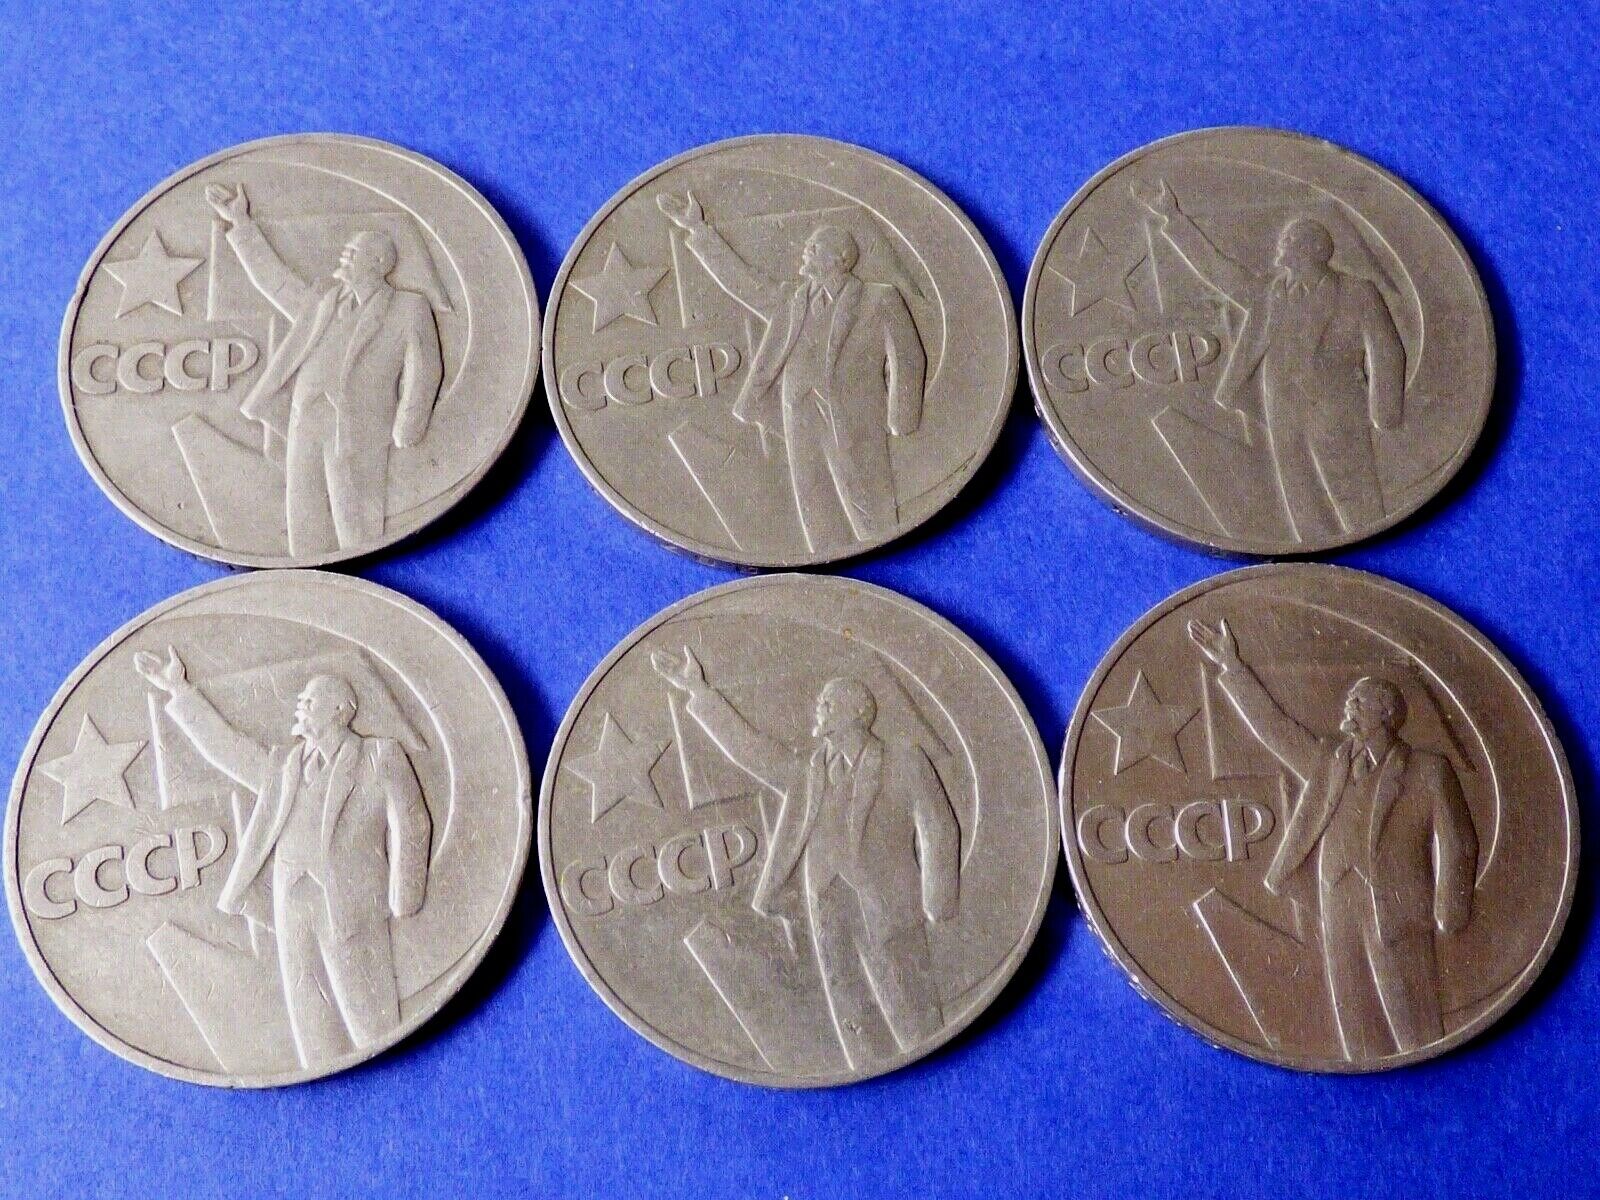 VTG USSR Russia set of 6 1 rouble coins 30 mm Great October Lenin 1917-1967